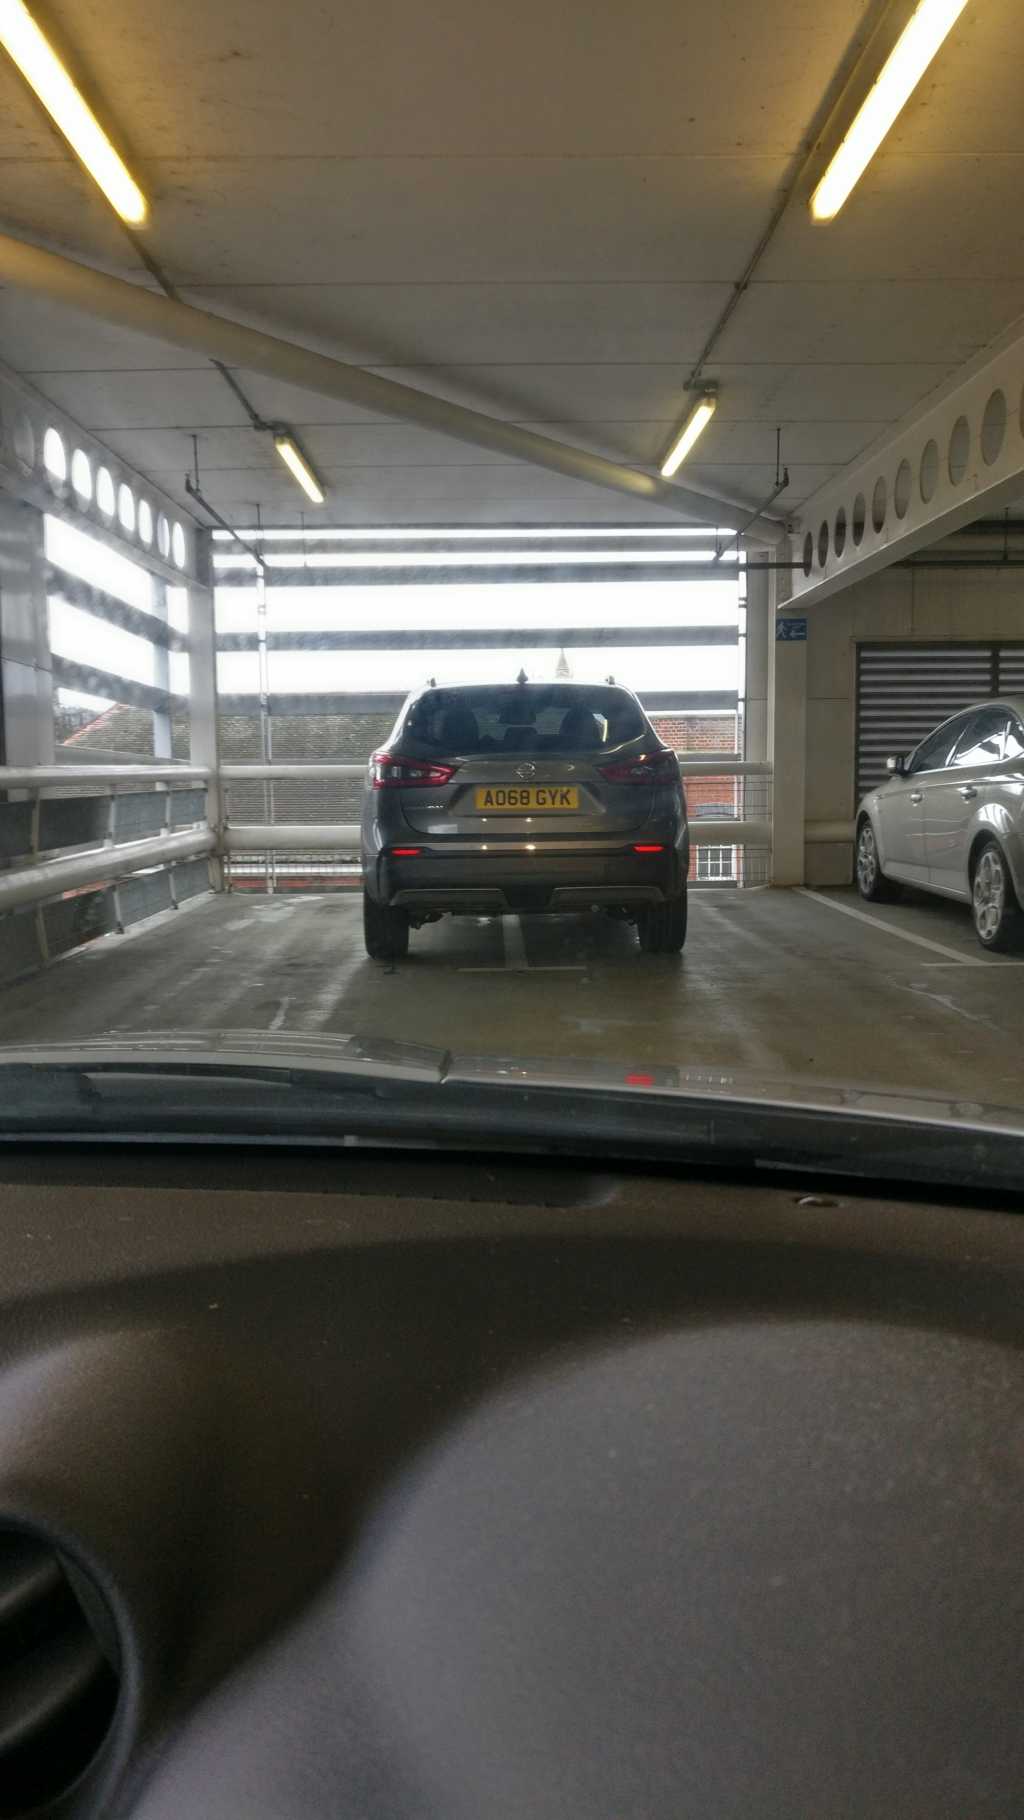 WHEN A CAR PARK IS LISTED FULL AND YOU TAKE TWO SPACES displaying Inconsiderate Parking